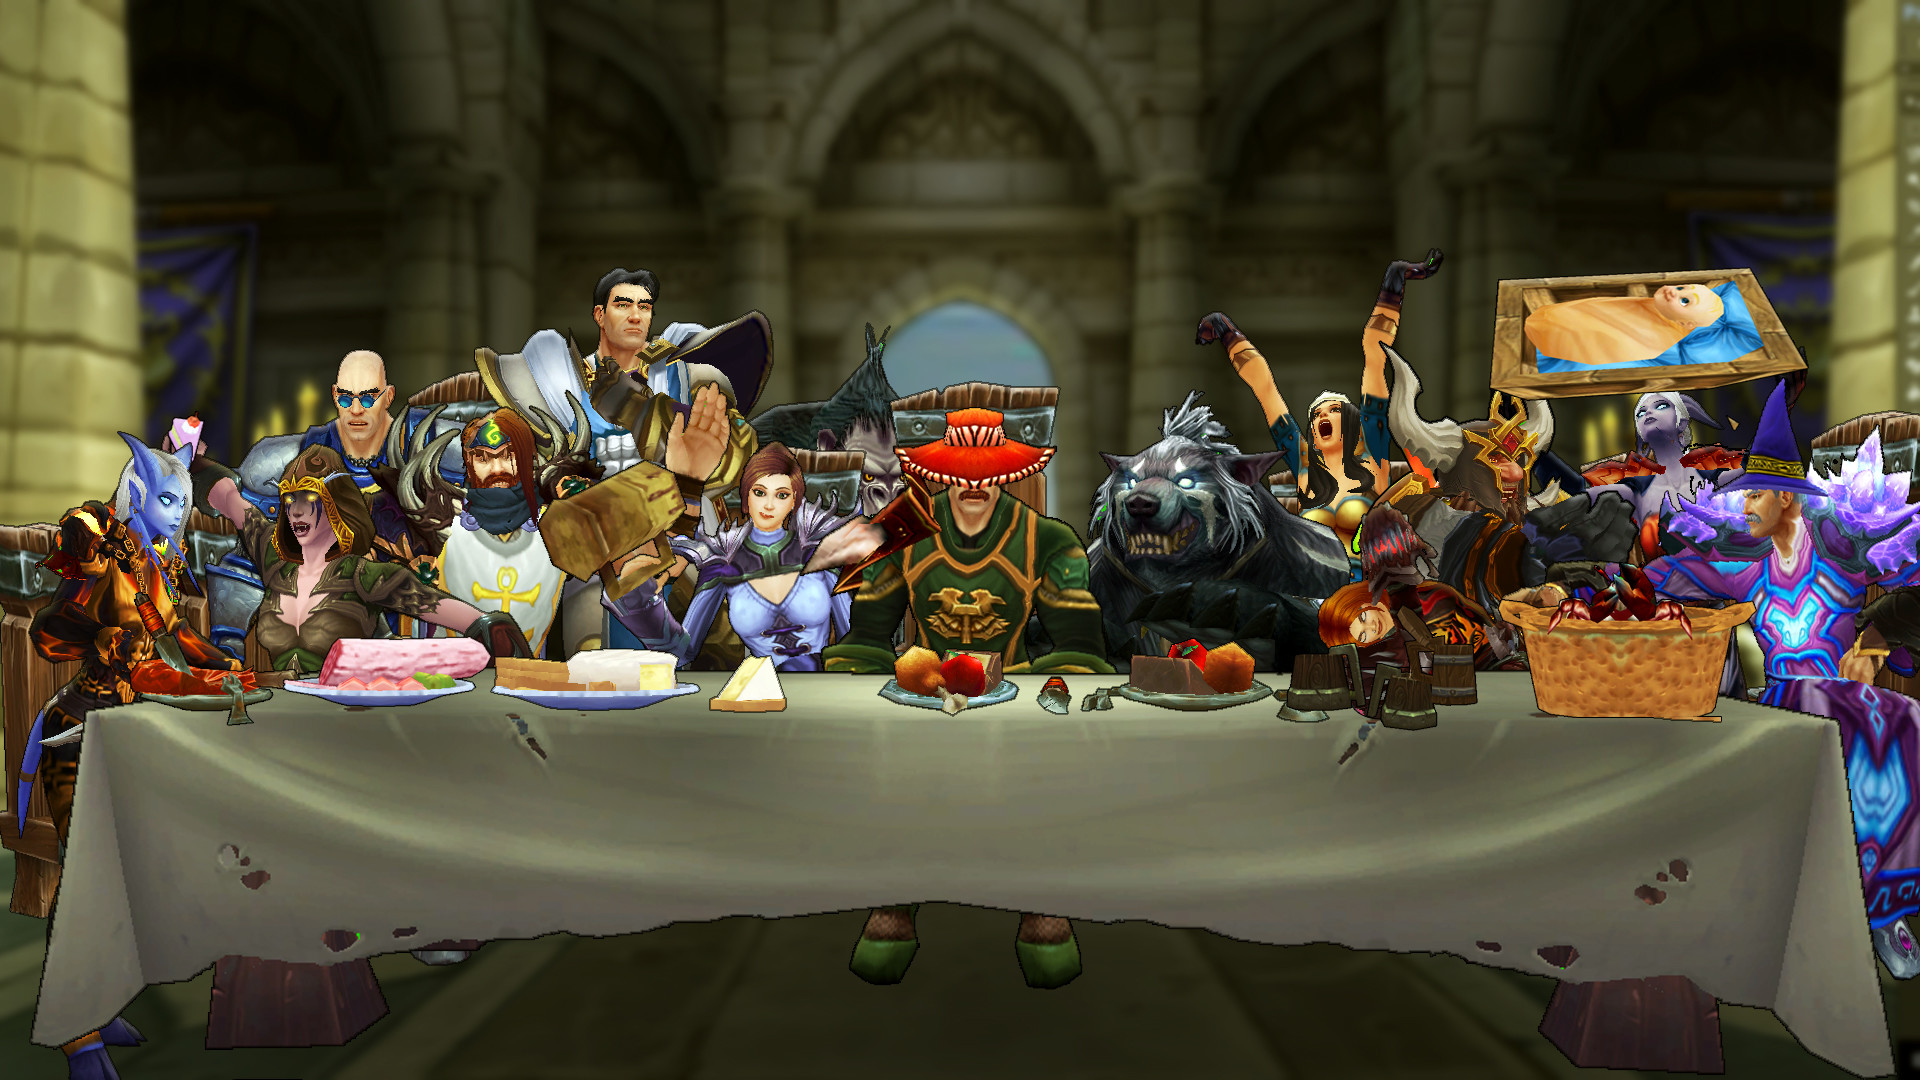 1920x1080 ImageI recreated "The Last Supper" as my guild Team!